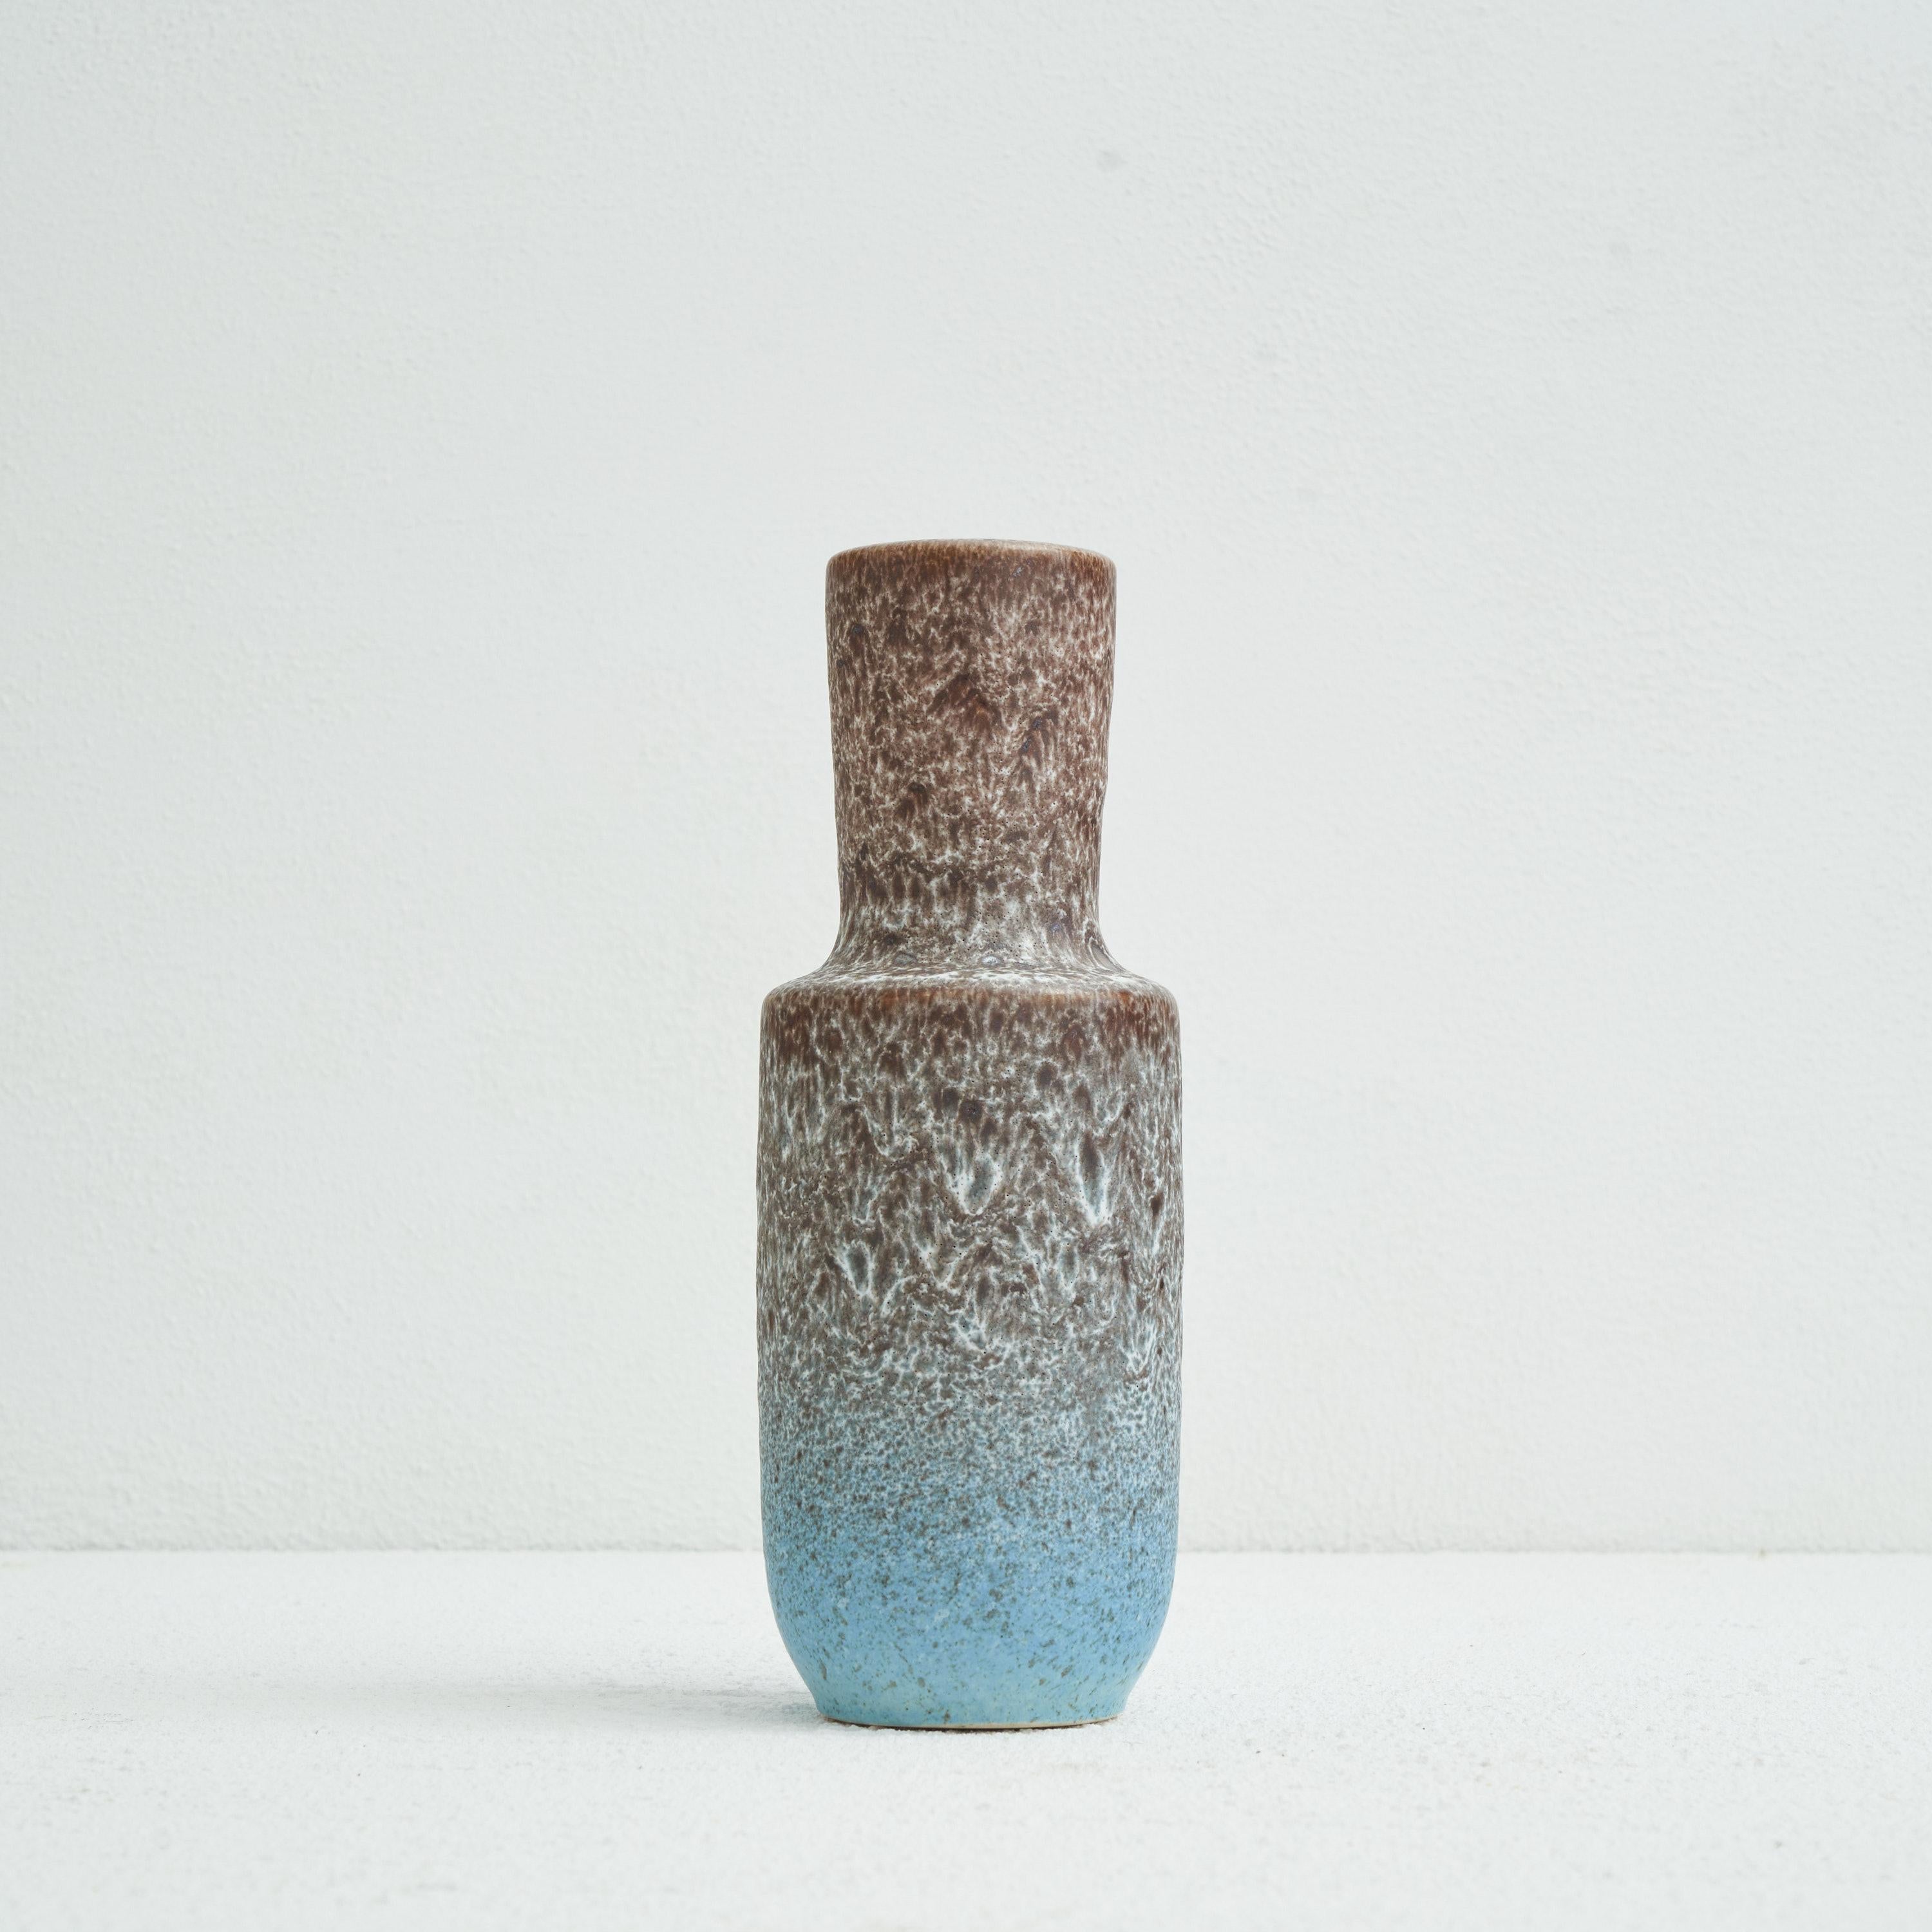 Volcanic Glazed mid century pottery vase by Steuler Keramik. Germany, mid 20th century.

Wonderful volcanic glazed mid century pottery vase by Steuler Keramik from Germany. A quintessentially mid century pottery vase from one of the famous West